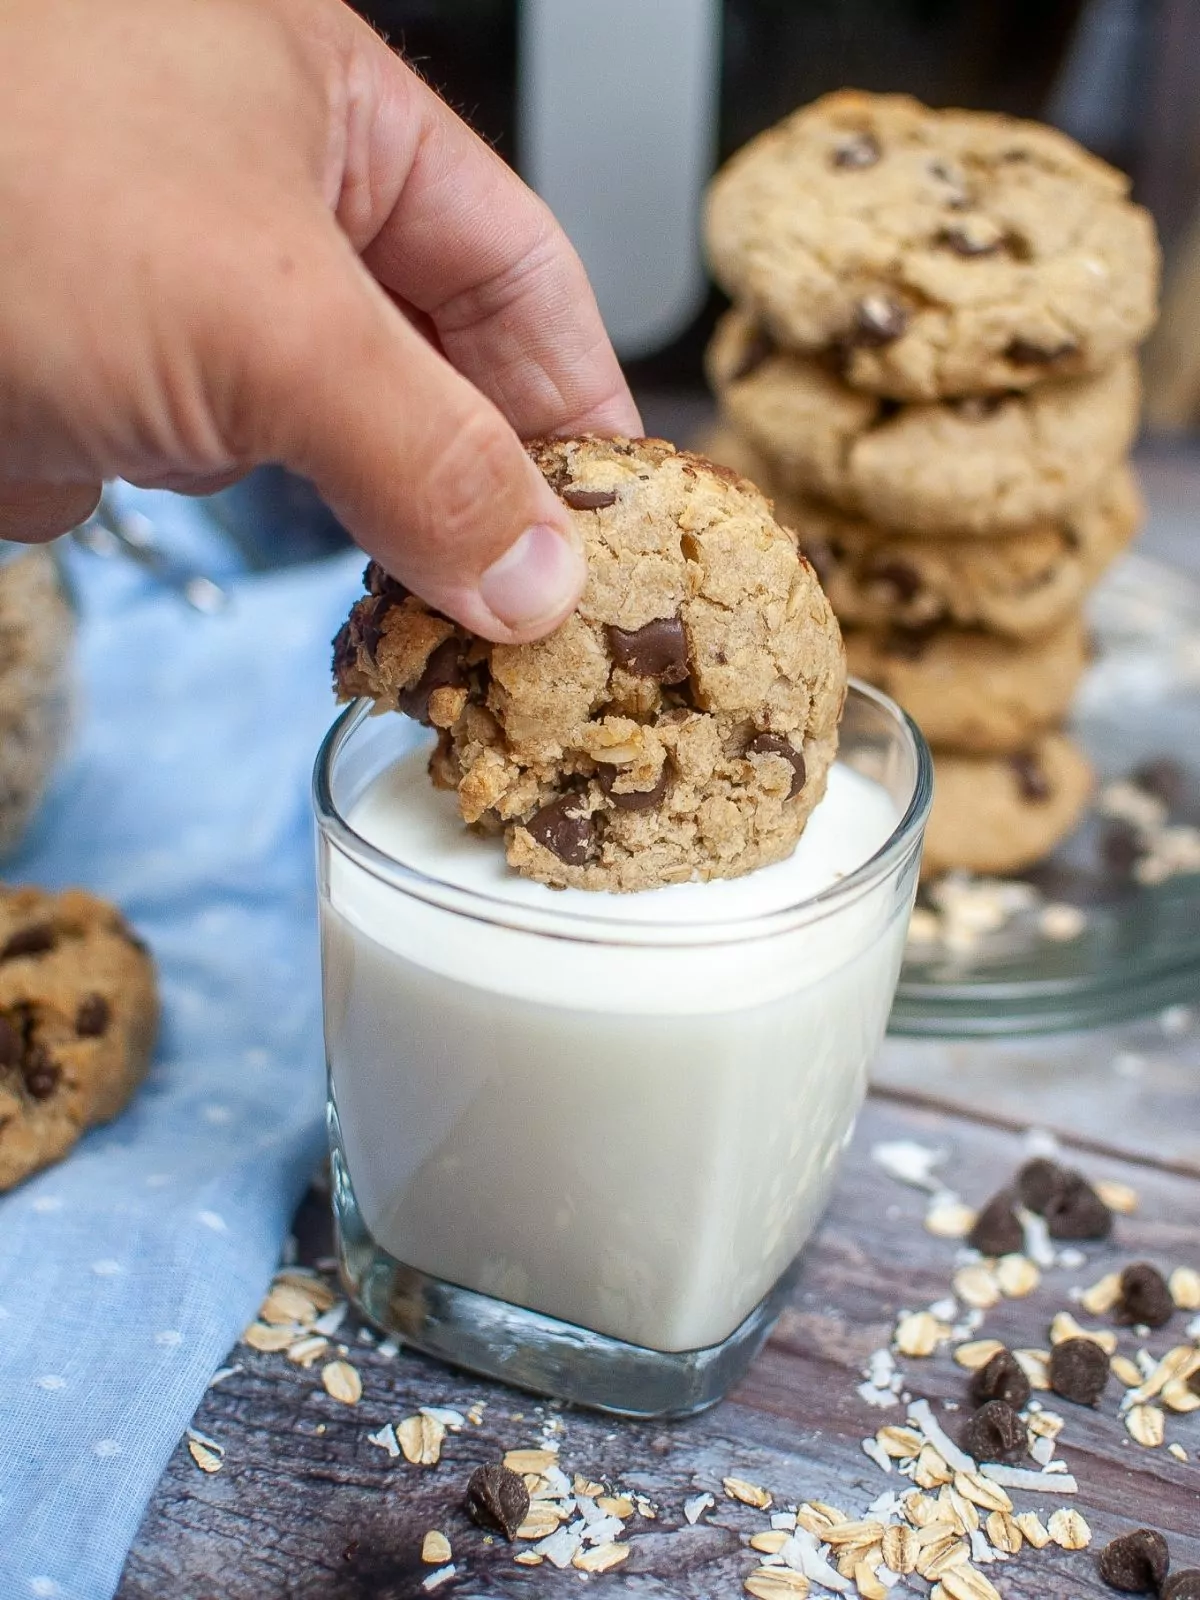 dipping chocolate chip oatmeal cookies in glass of milk.